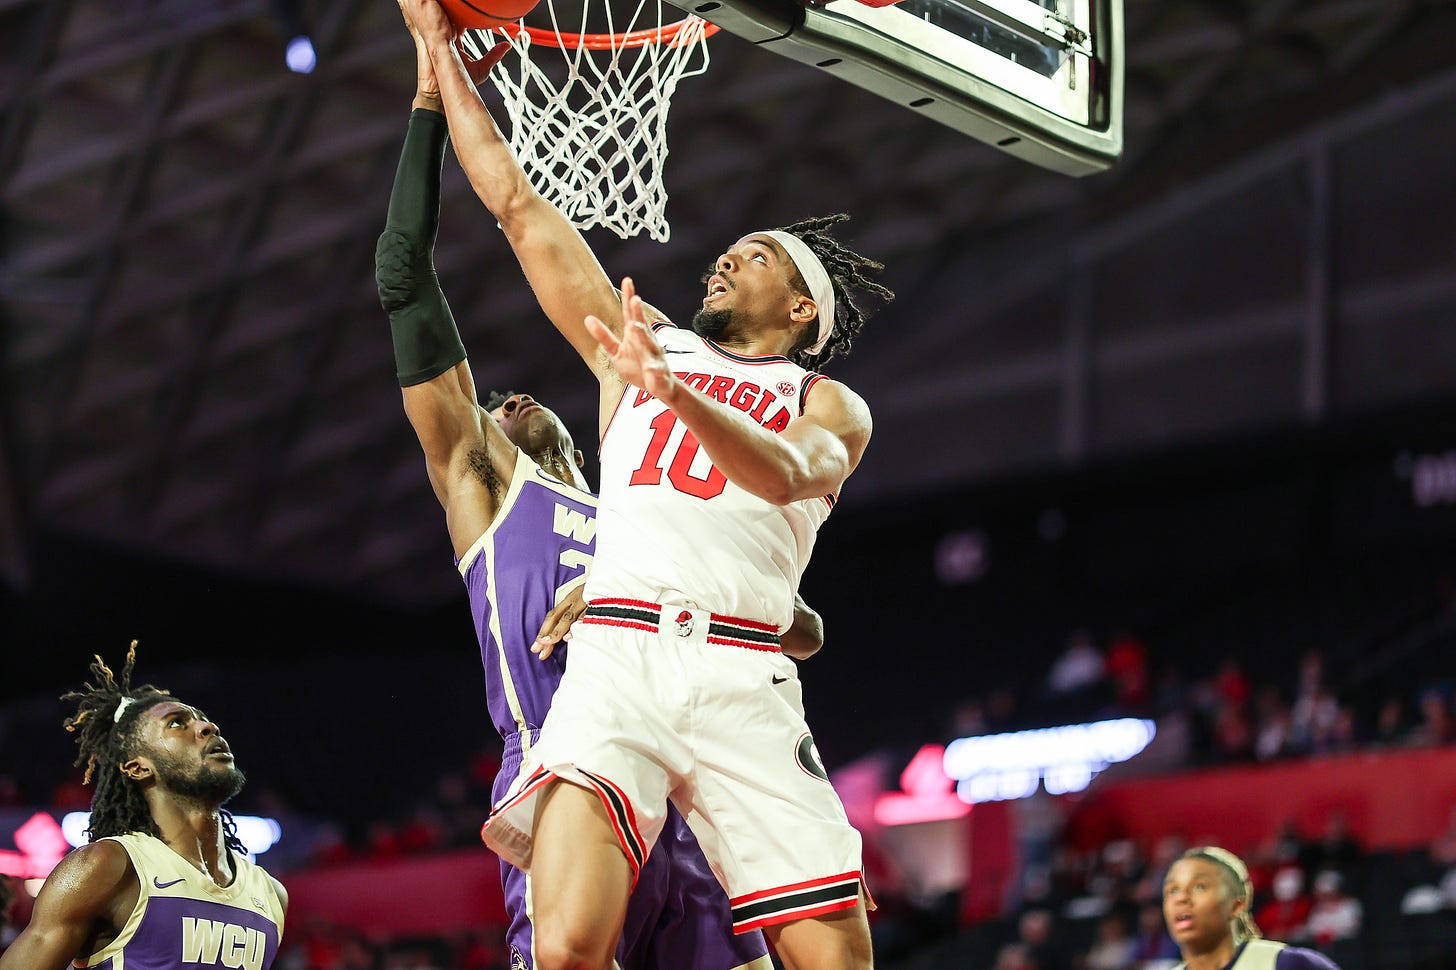 Georgia during a game against Western Carolina at Stegeman Coliseum in Athens, Ga., on Monday, Dec. 20, 2021. (Photo by Mackenzie Miles)